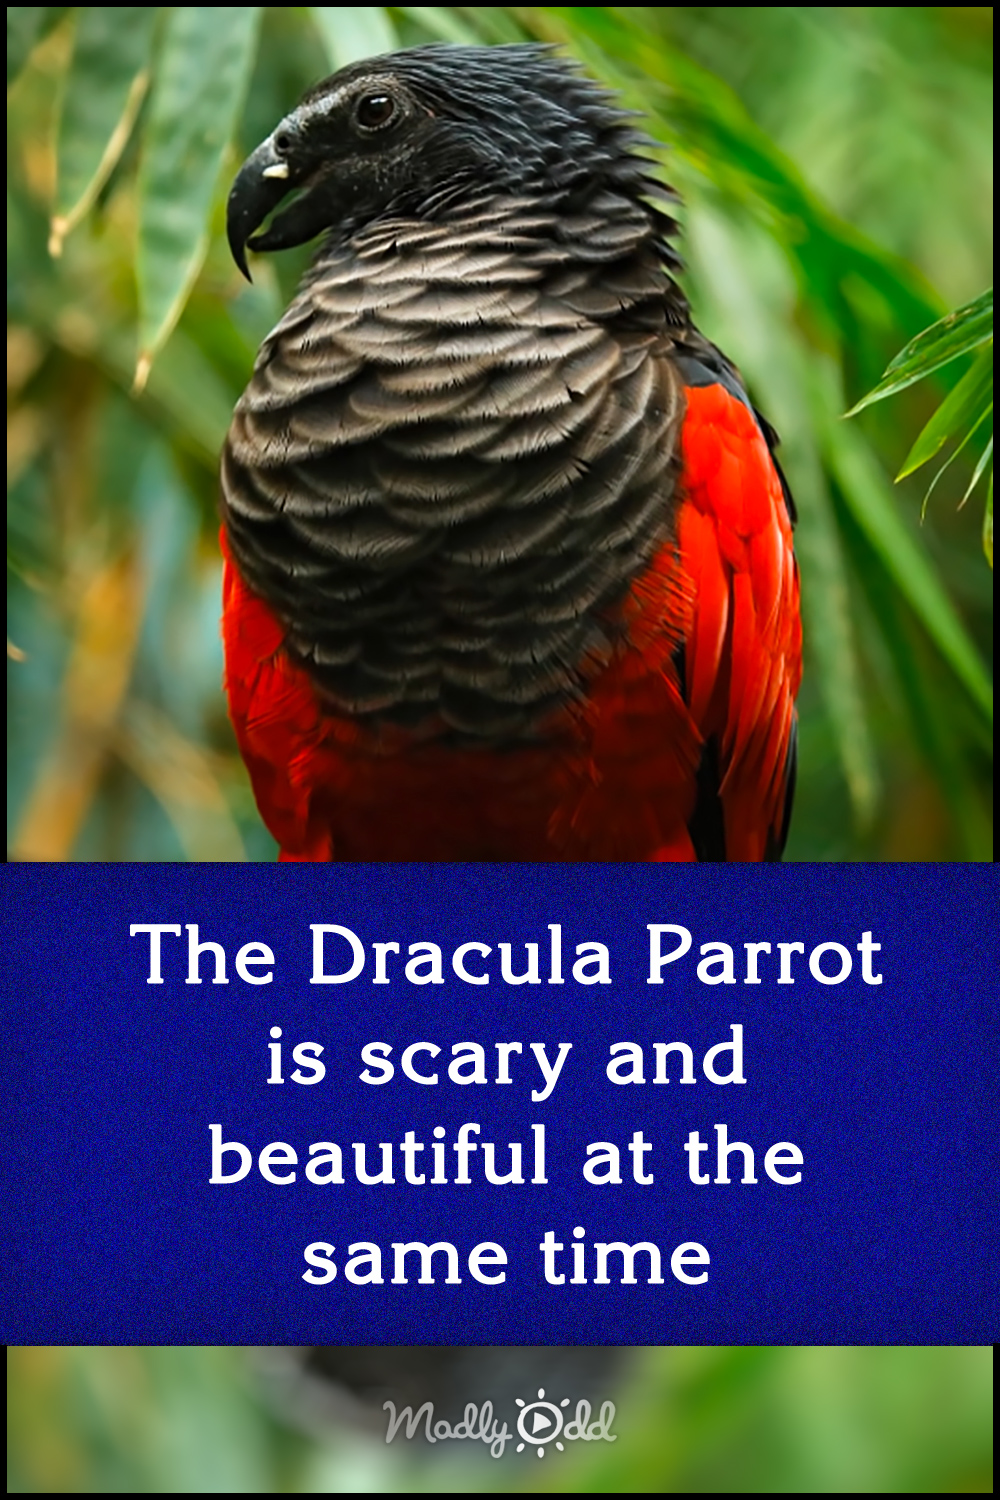 The Dracula Parrot is scary and beautiful at the same time